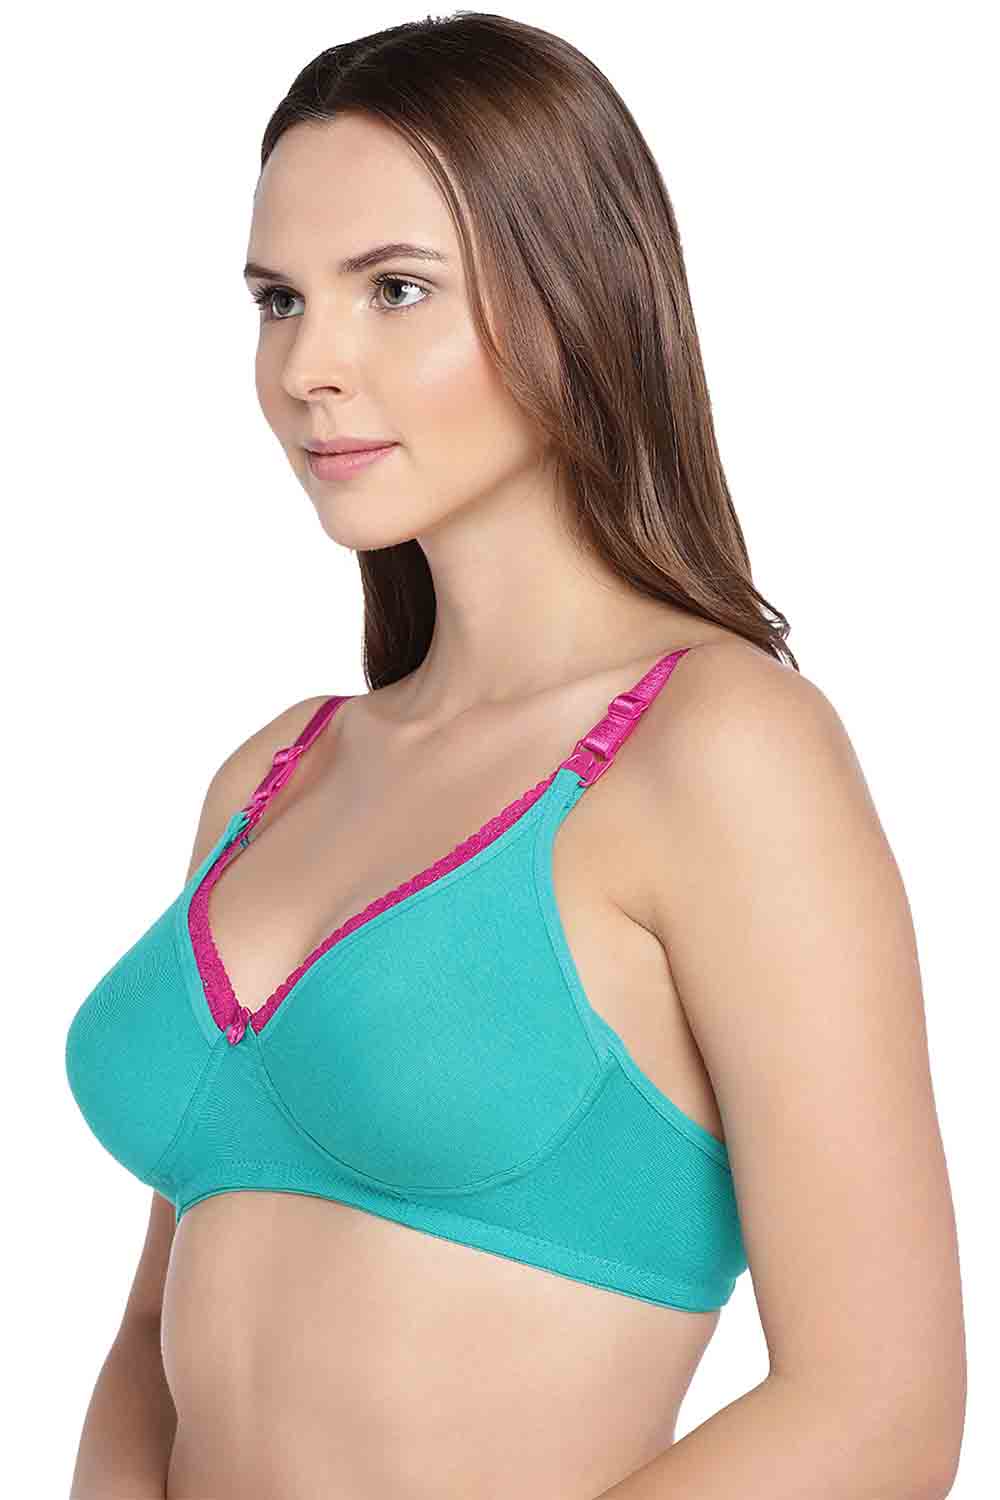 Organic Cotton Antimicrobial Laced Maternity Bra (Pack of 3)-IMB003A_3B_3C